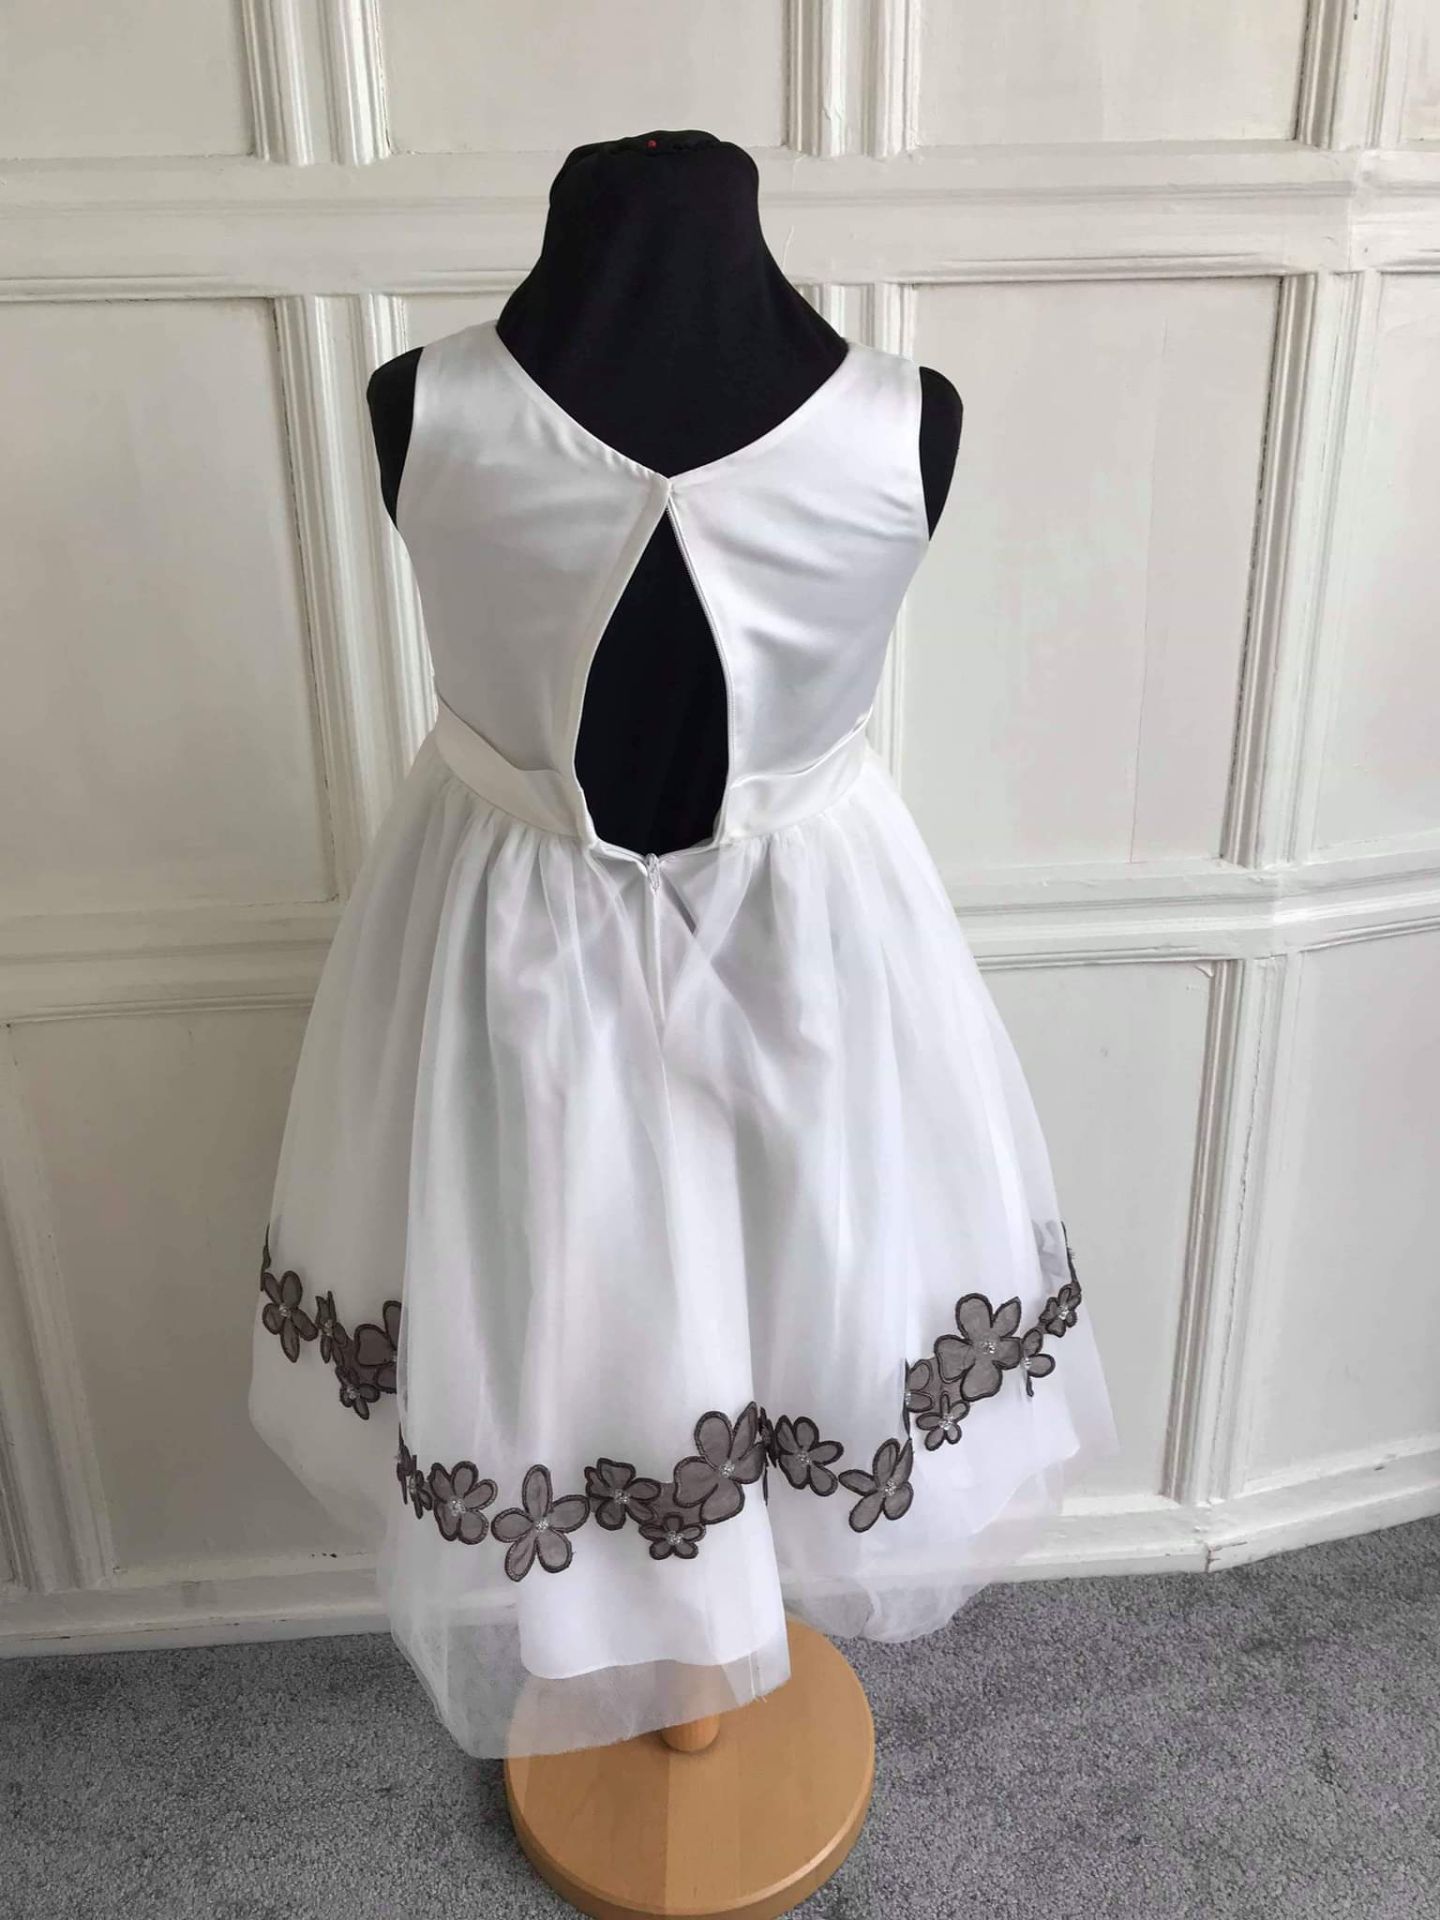 Alfred Angelo Flowergirl Dress Age 6 - Image 2 of 6